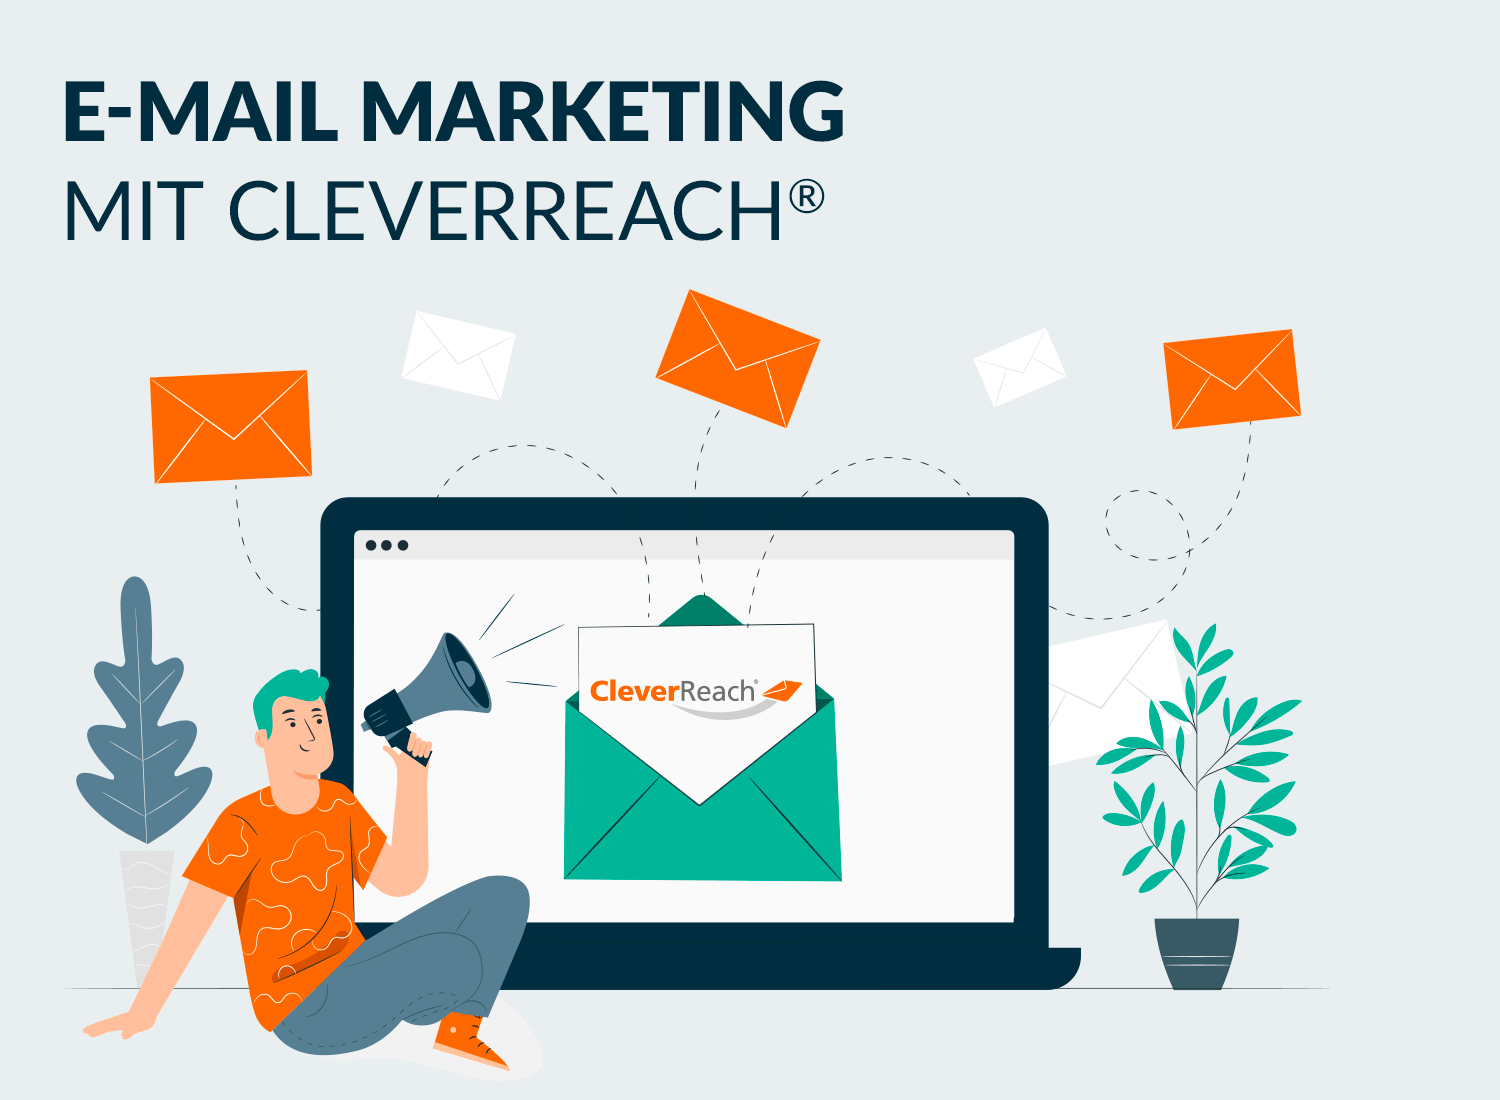 Featured image for “E-Mail Marketing mit CleverReach®”